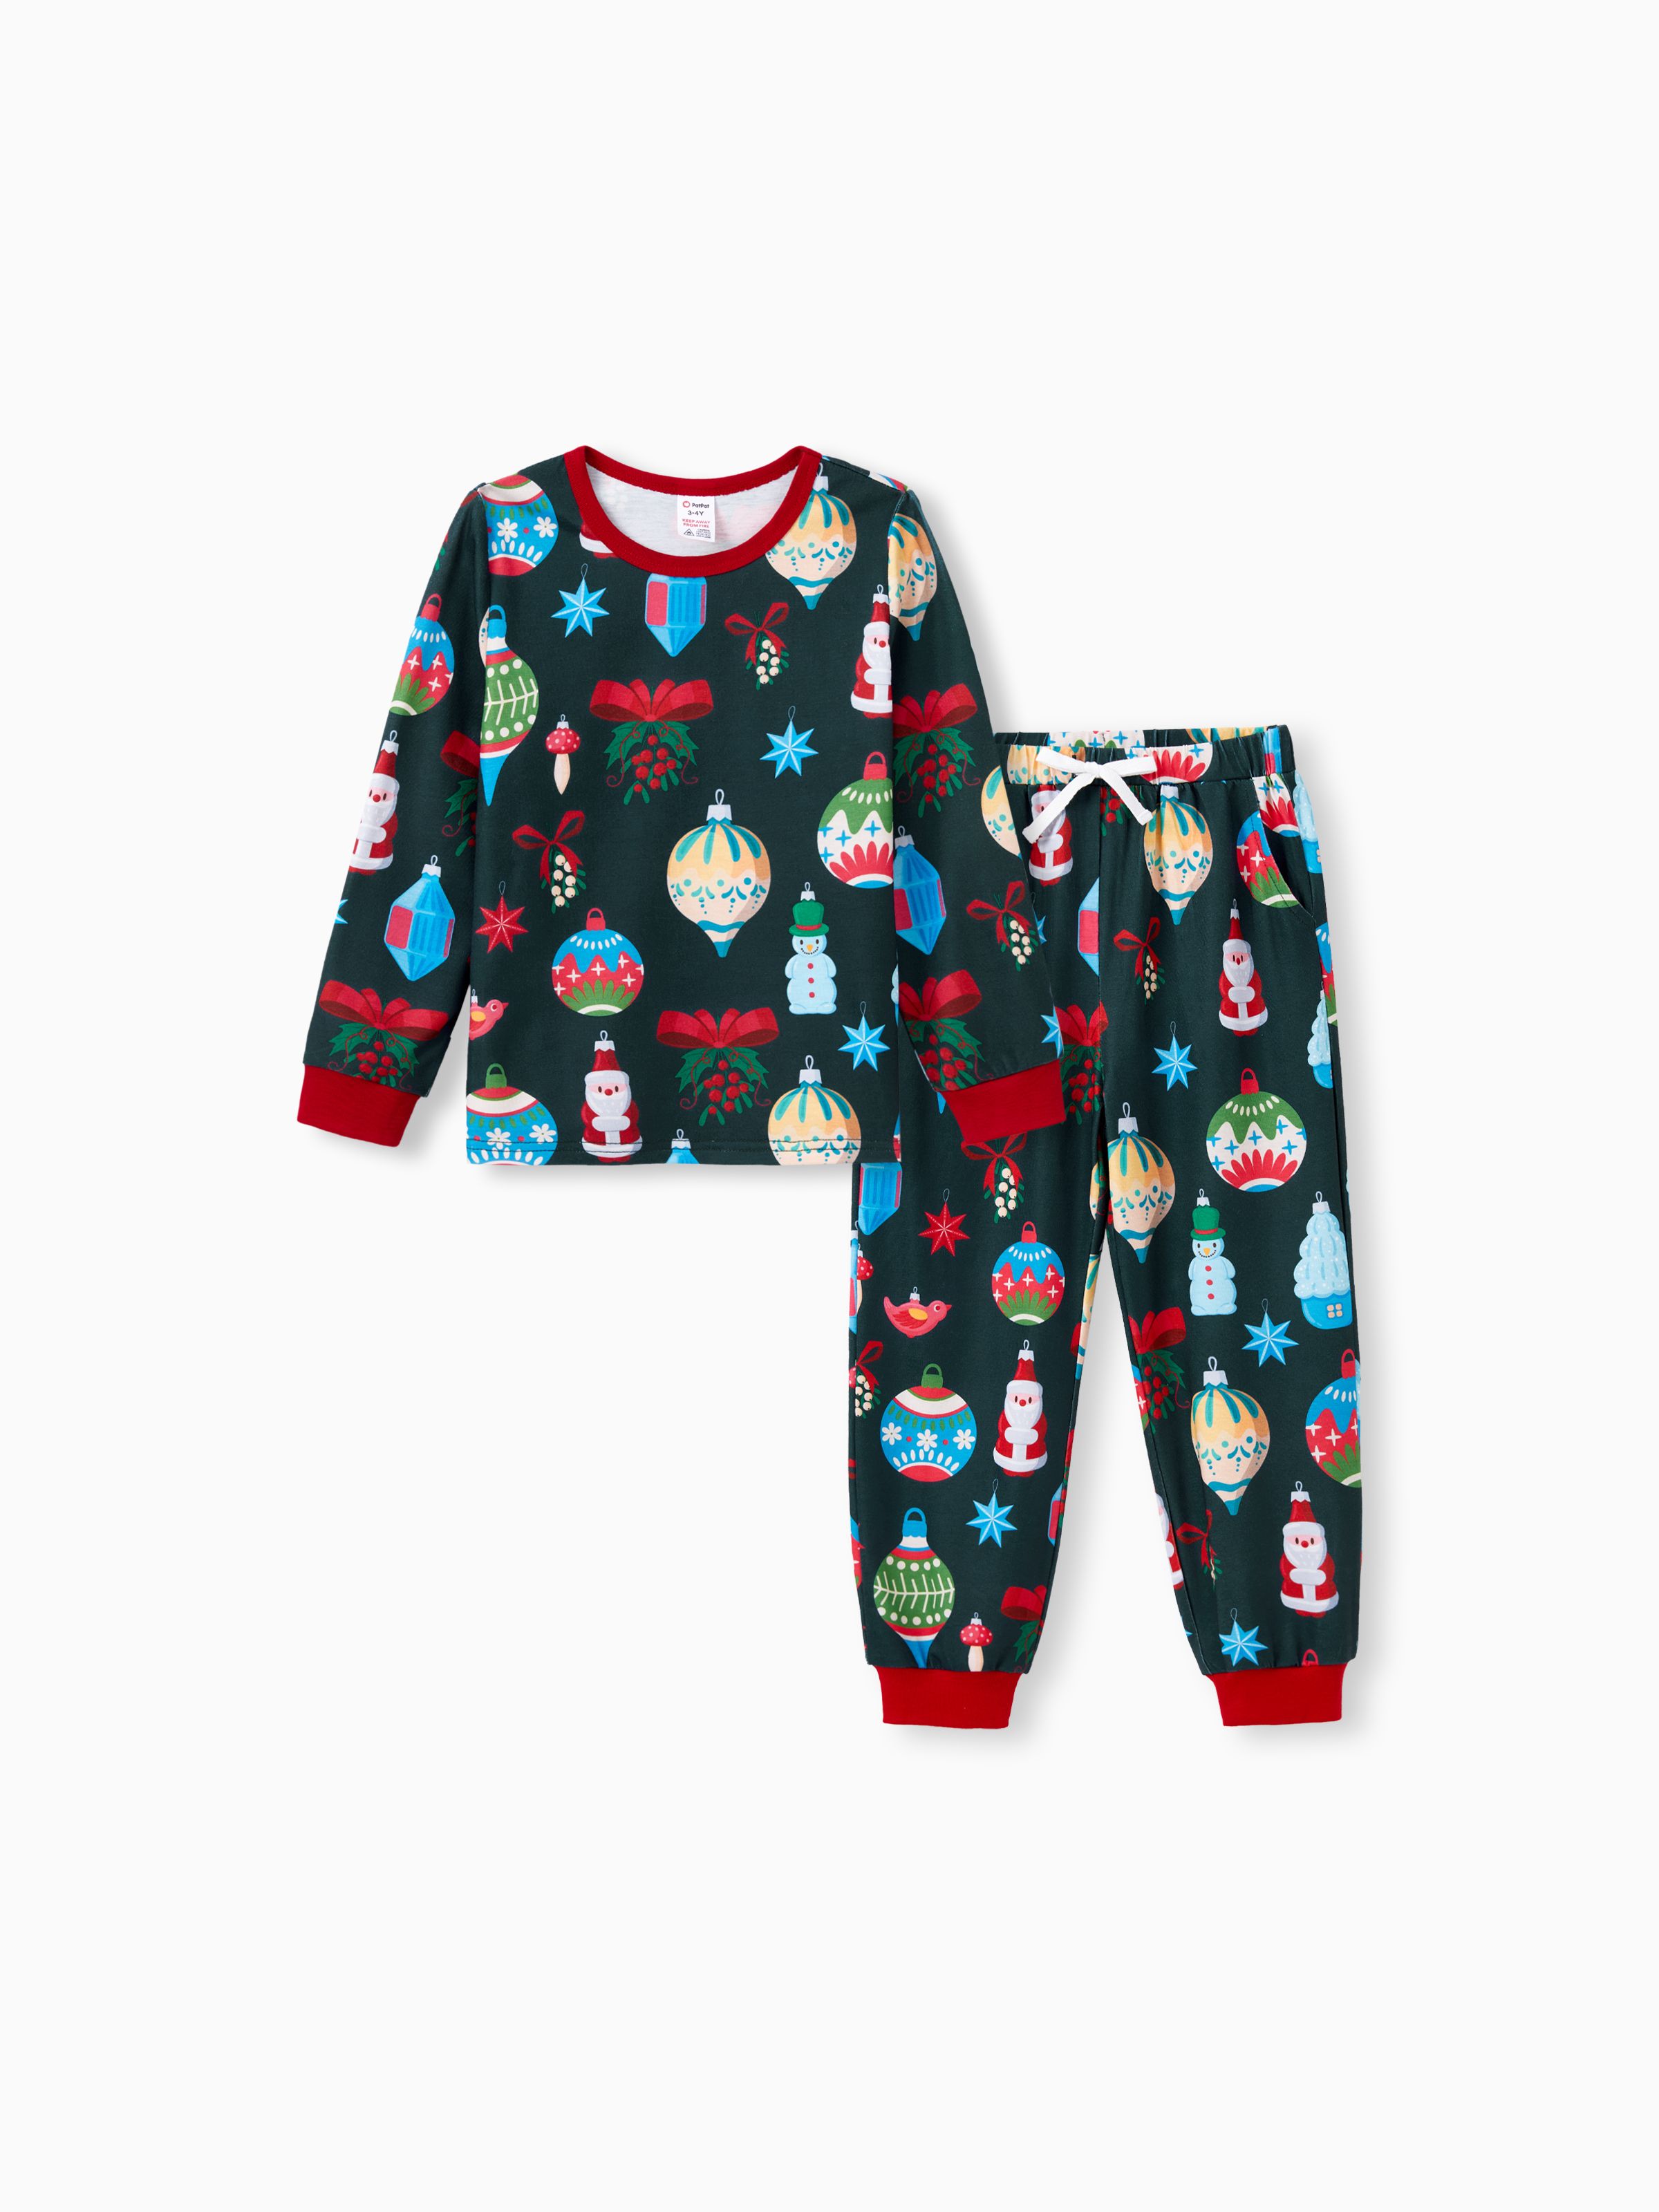 

Christmas Family Matching Allover Christmas Light Pattern Pajamas Sets with Drawstring and Pockets (Flame Resistant)